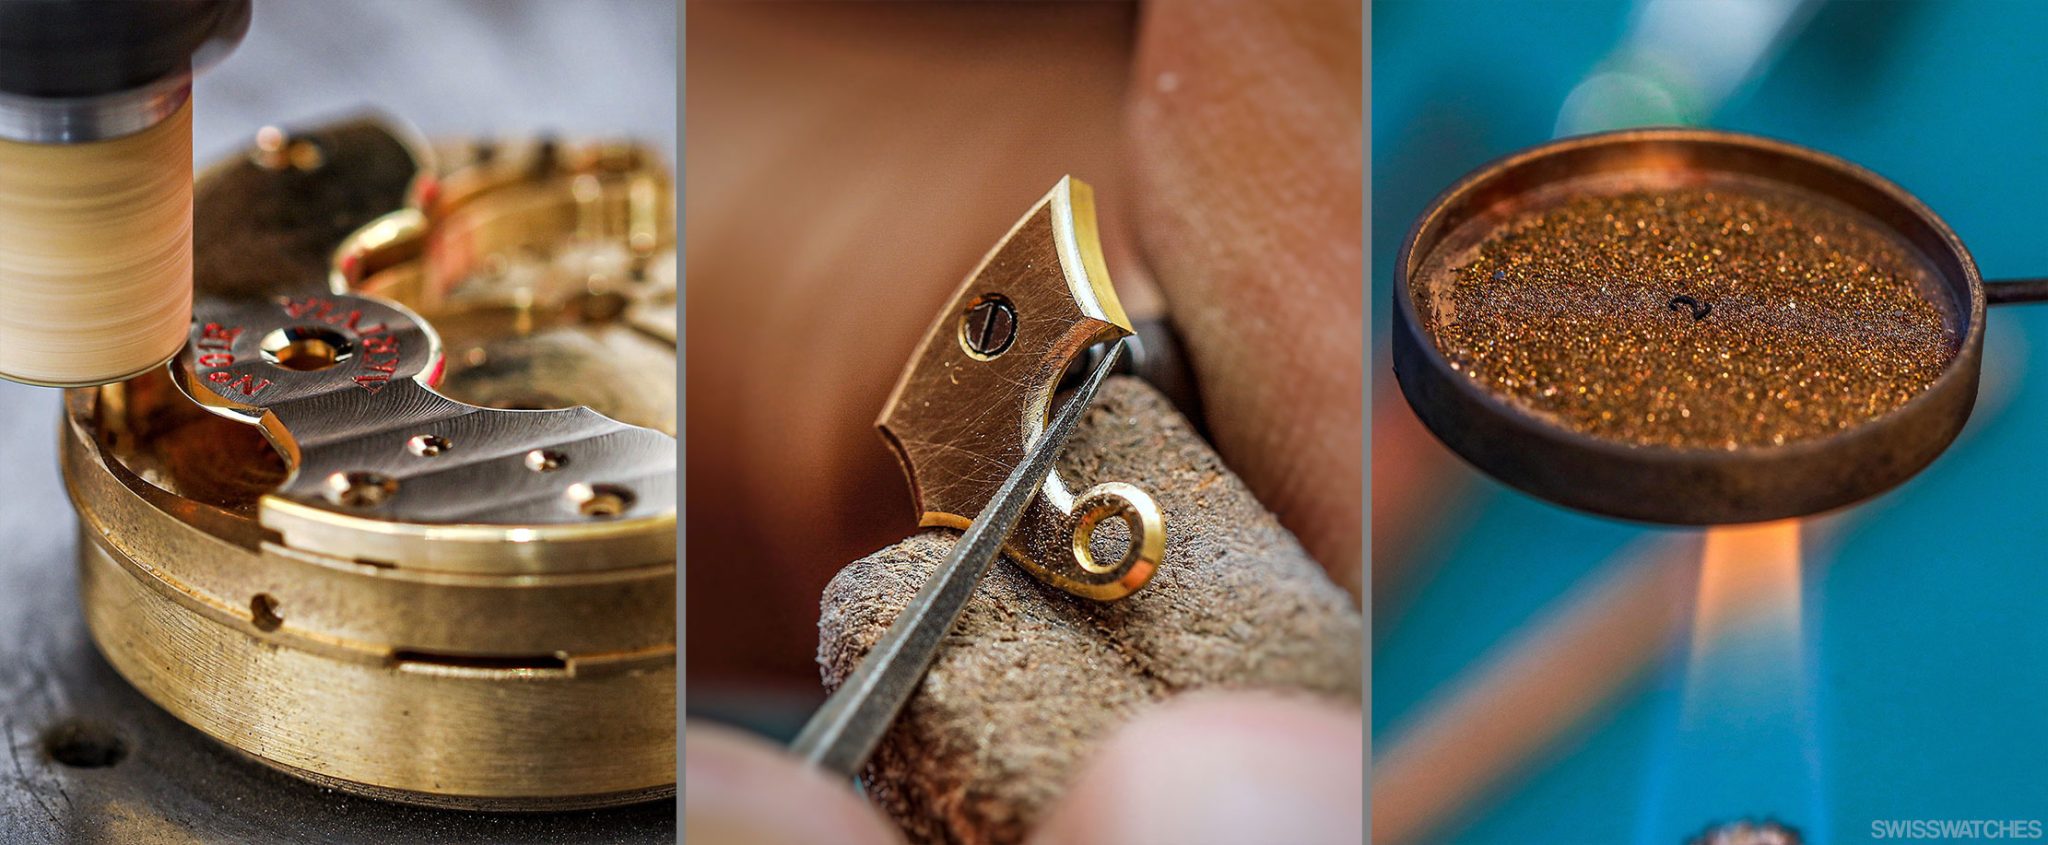 independent-watchmakers-atelier-akrivia-traditionelle-techniken-1